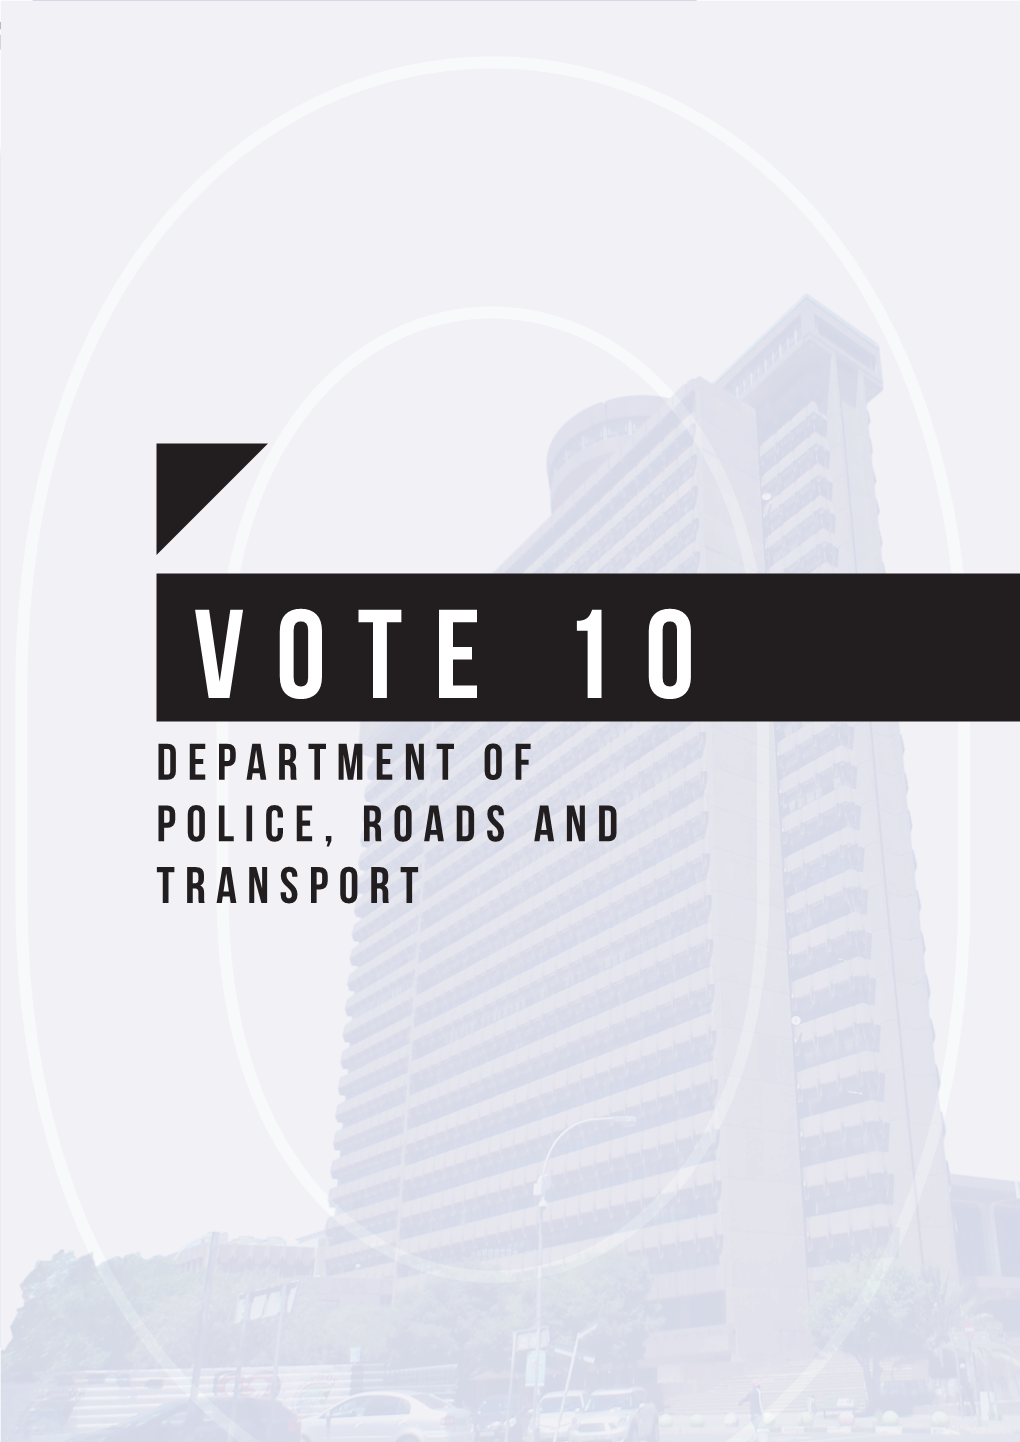 Department of Police, Roads and Transport